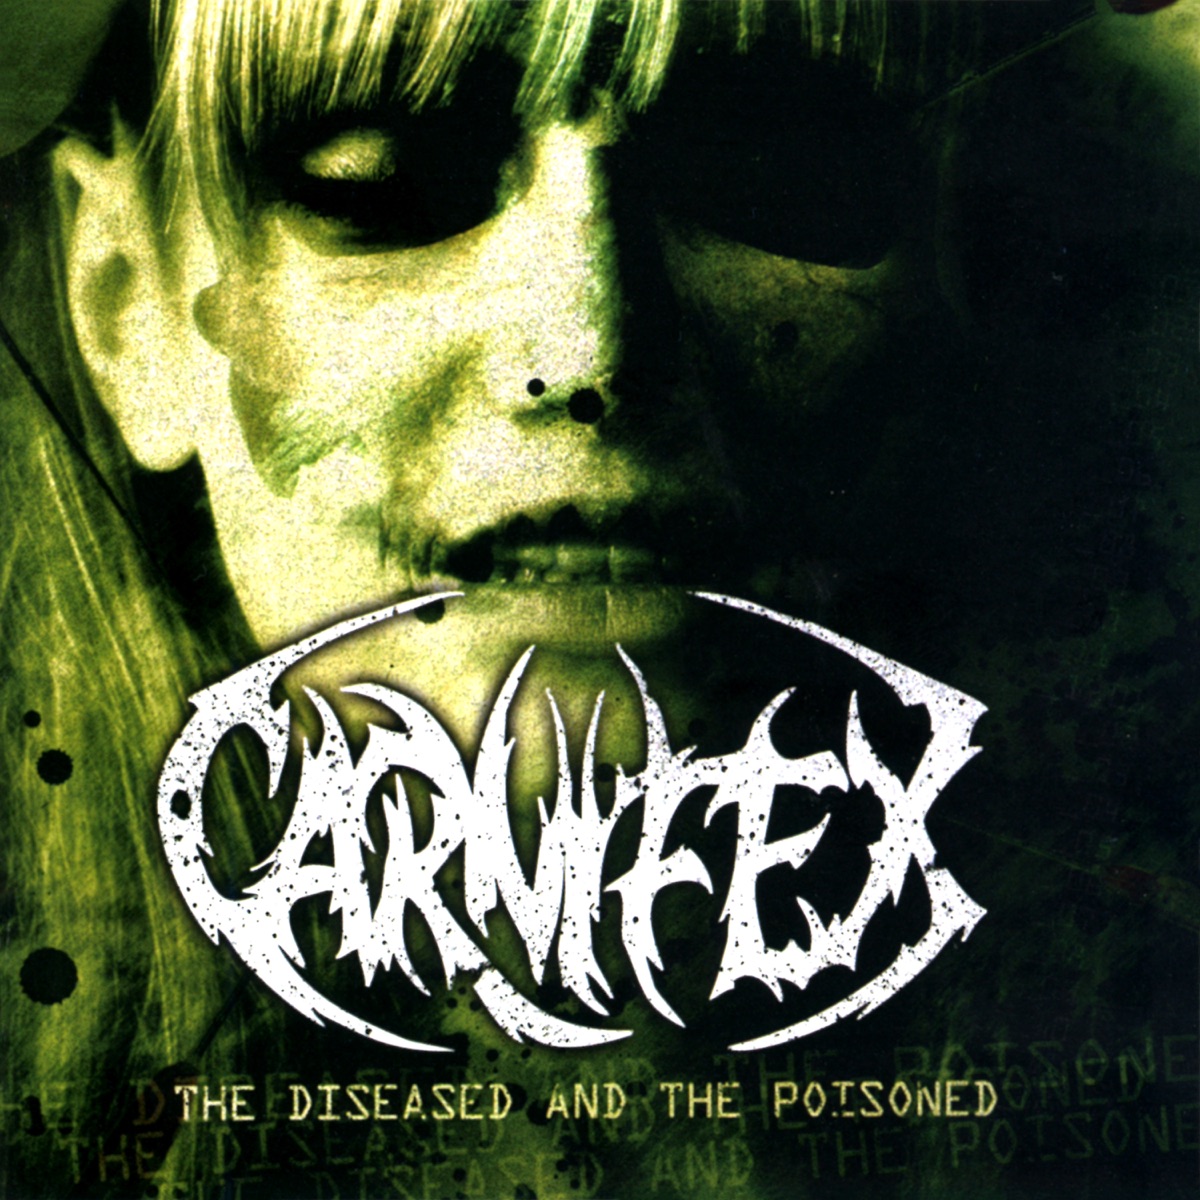 The Diseased And The Poisoned - Album by Carnifex - Apple Music